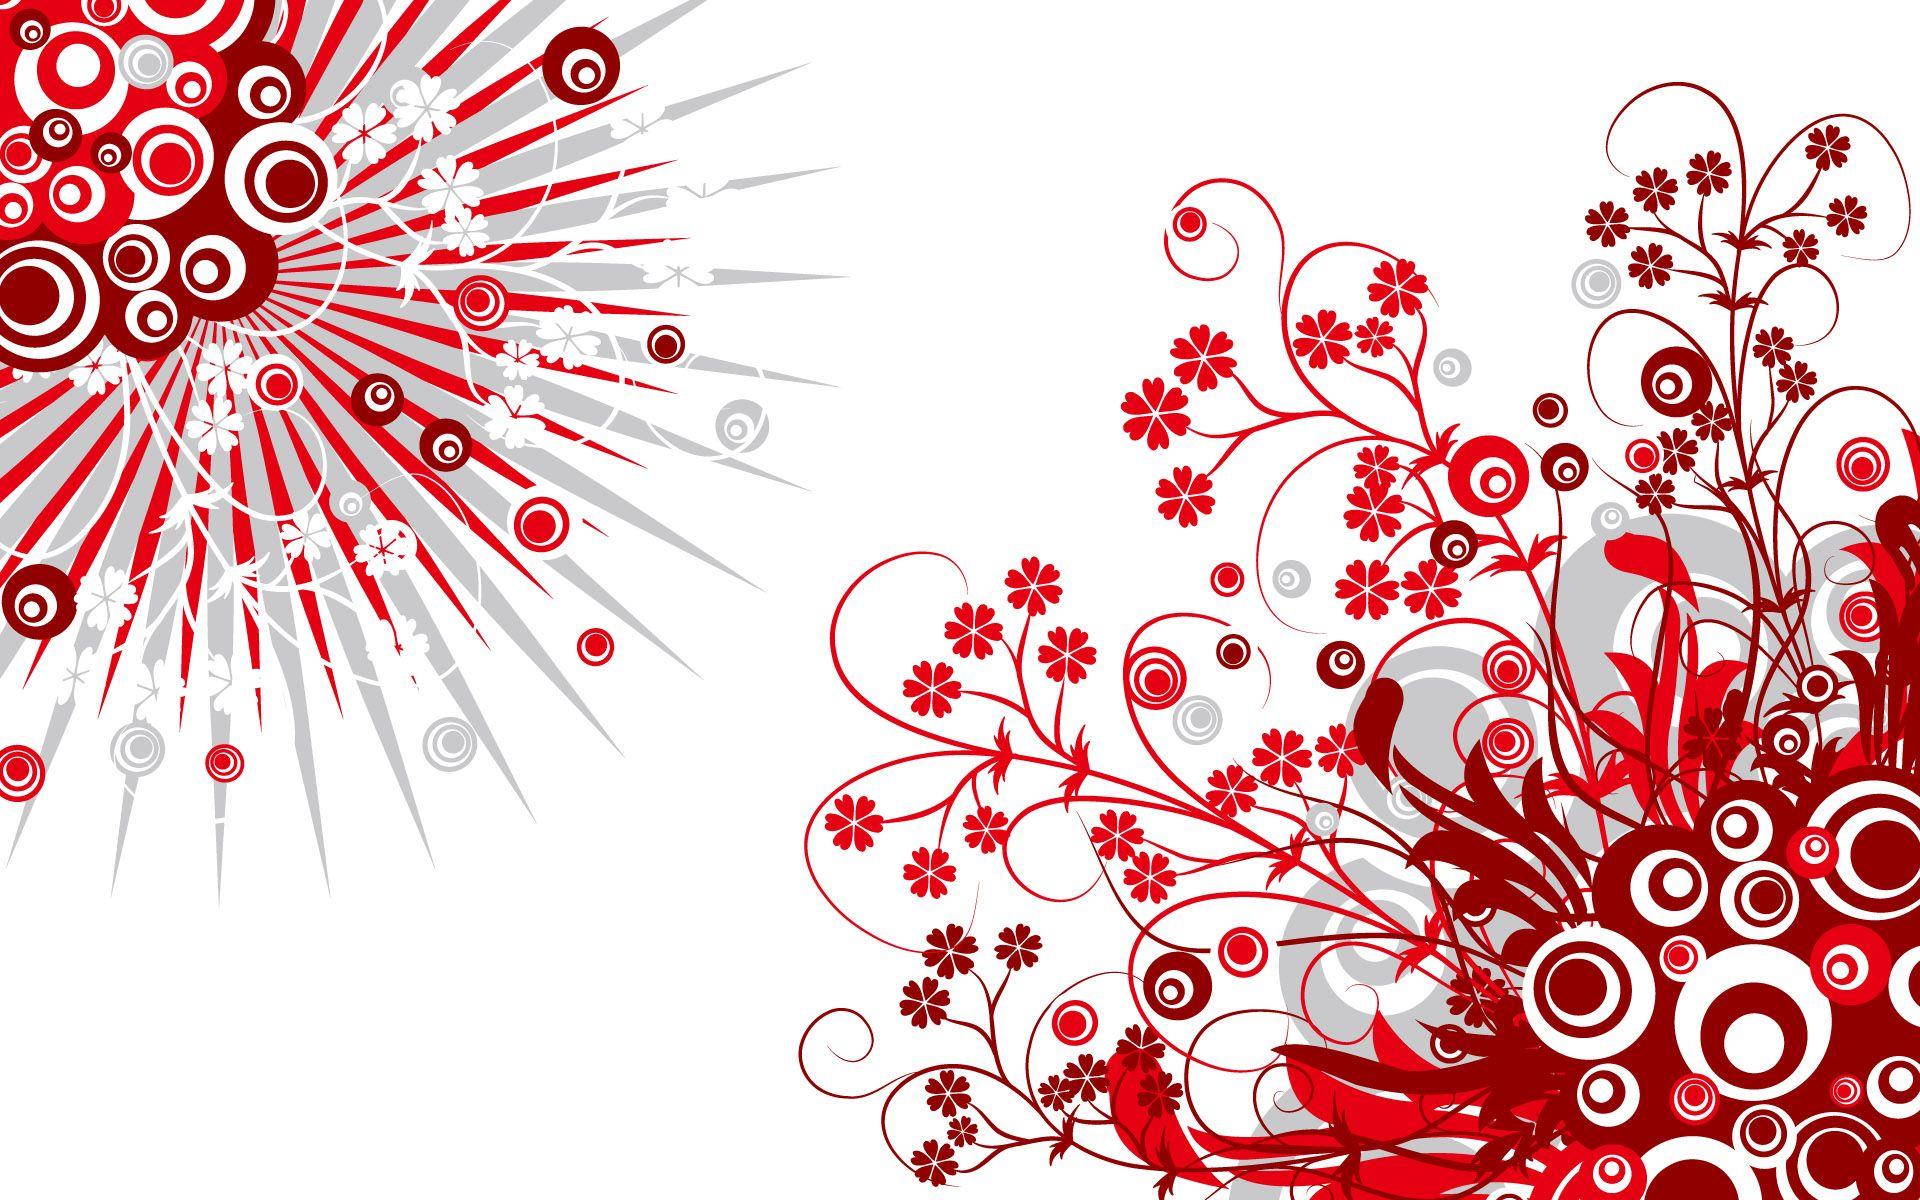 In Red And White Vectoriales HD Taringa 738648 Wallpaper wallpaper